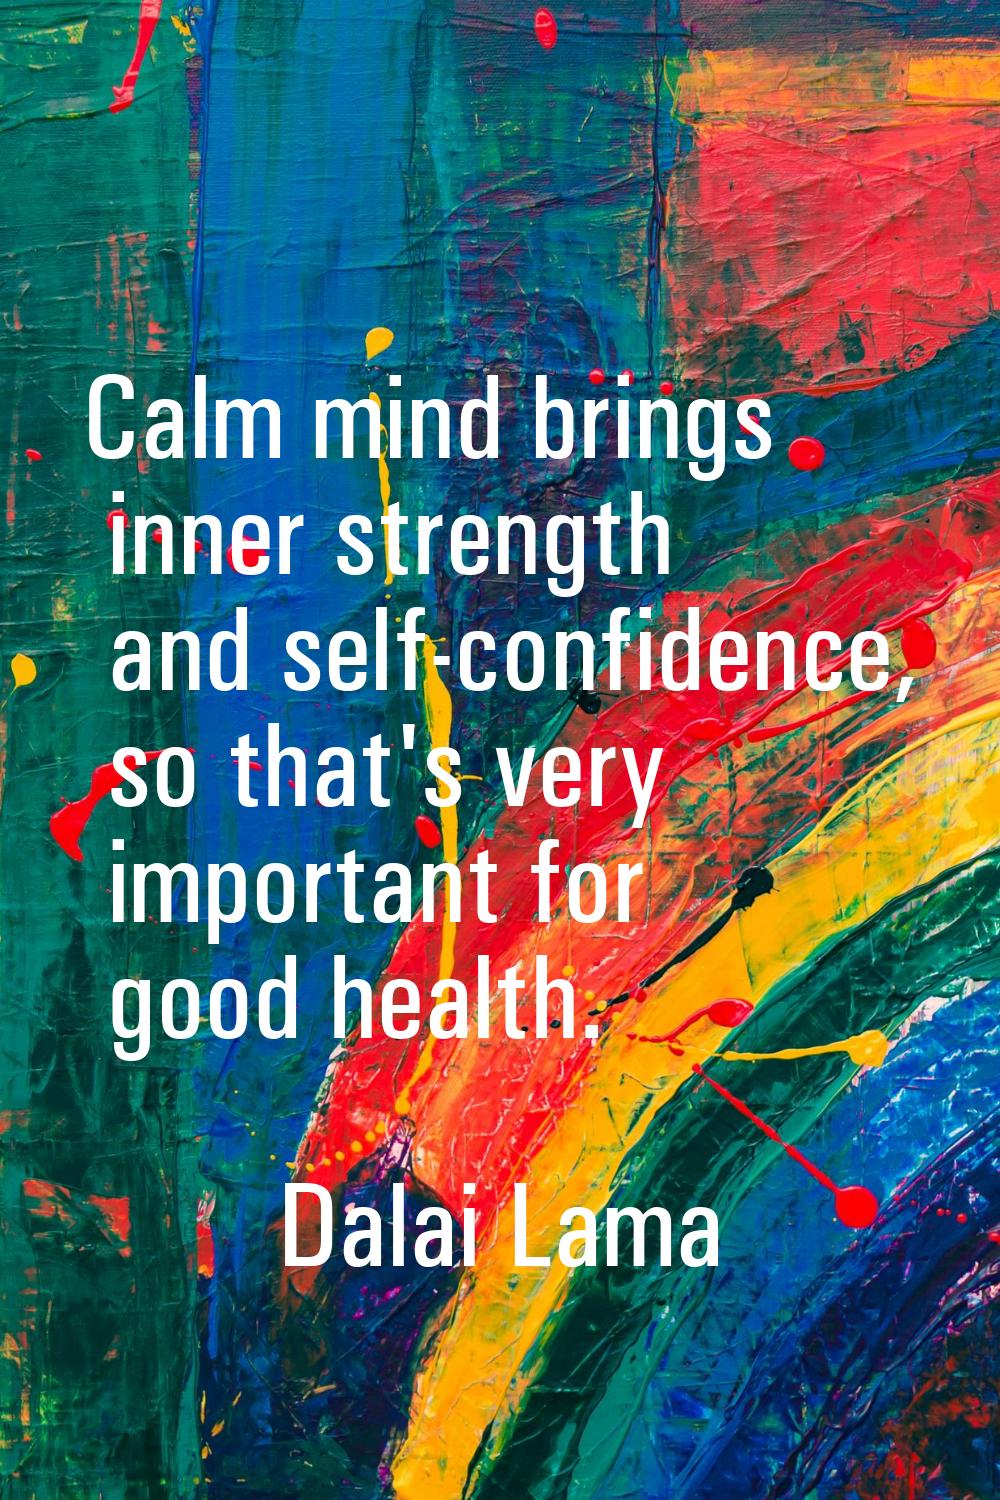 Calm mind brings inner strength and self-confidence, so that's very important for good health.